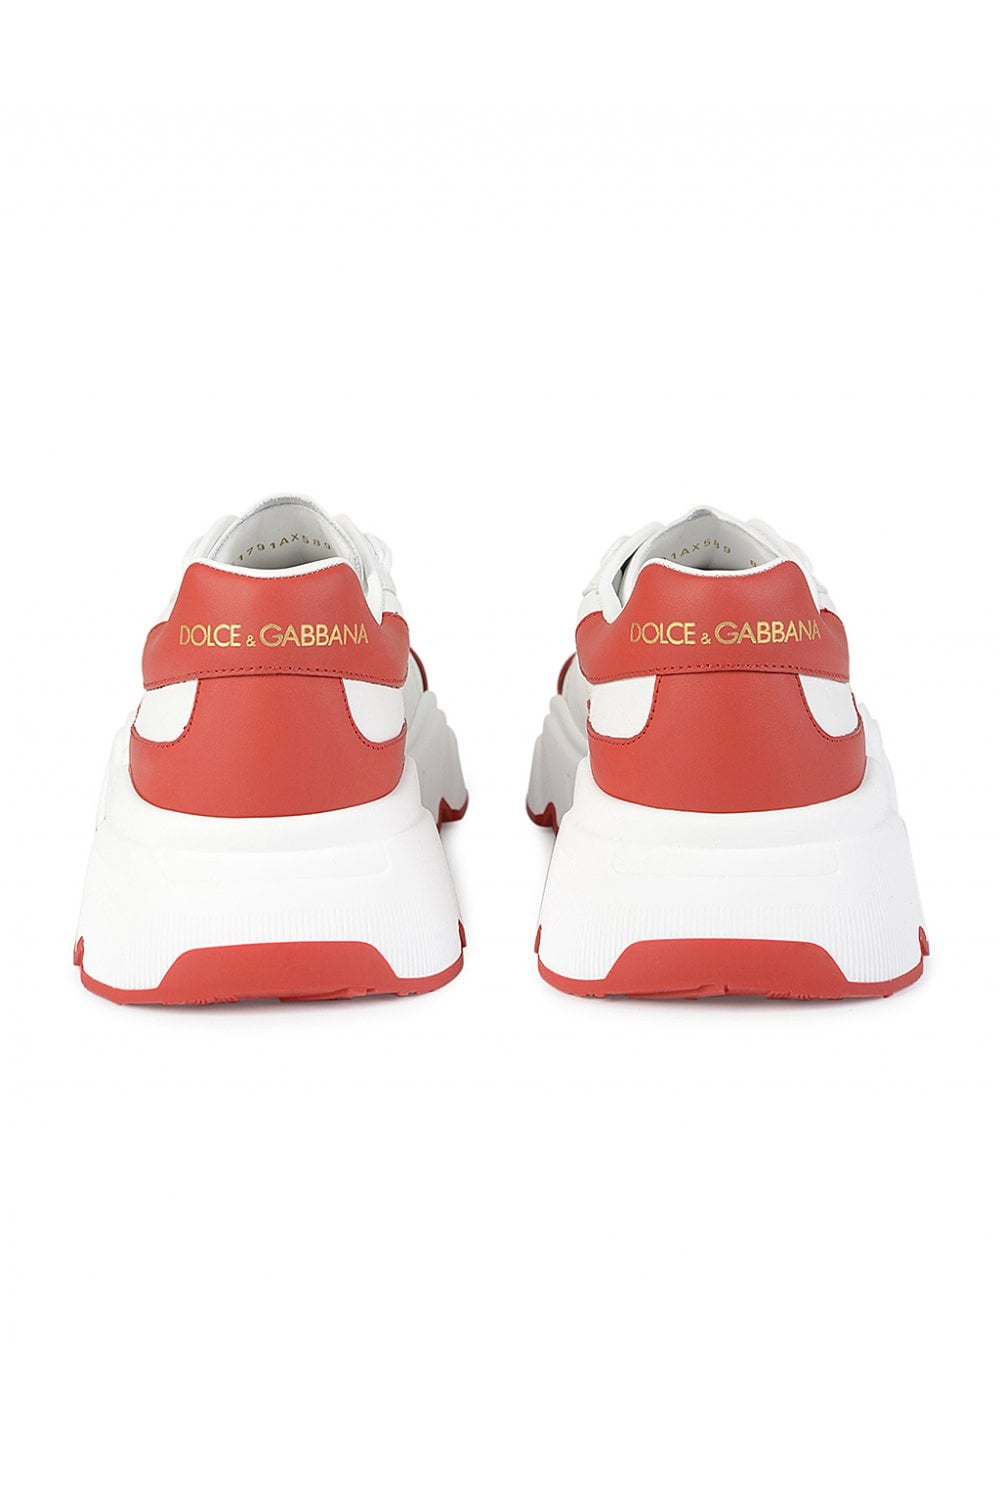 Dolce & Gabbana Daymaster Trainers White